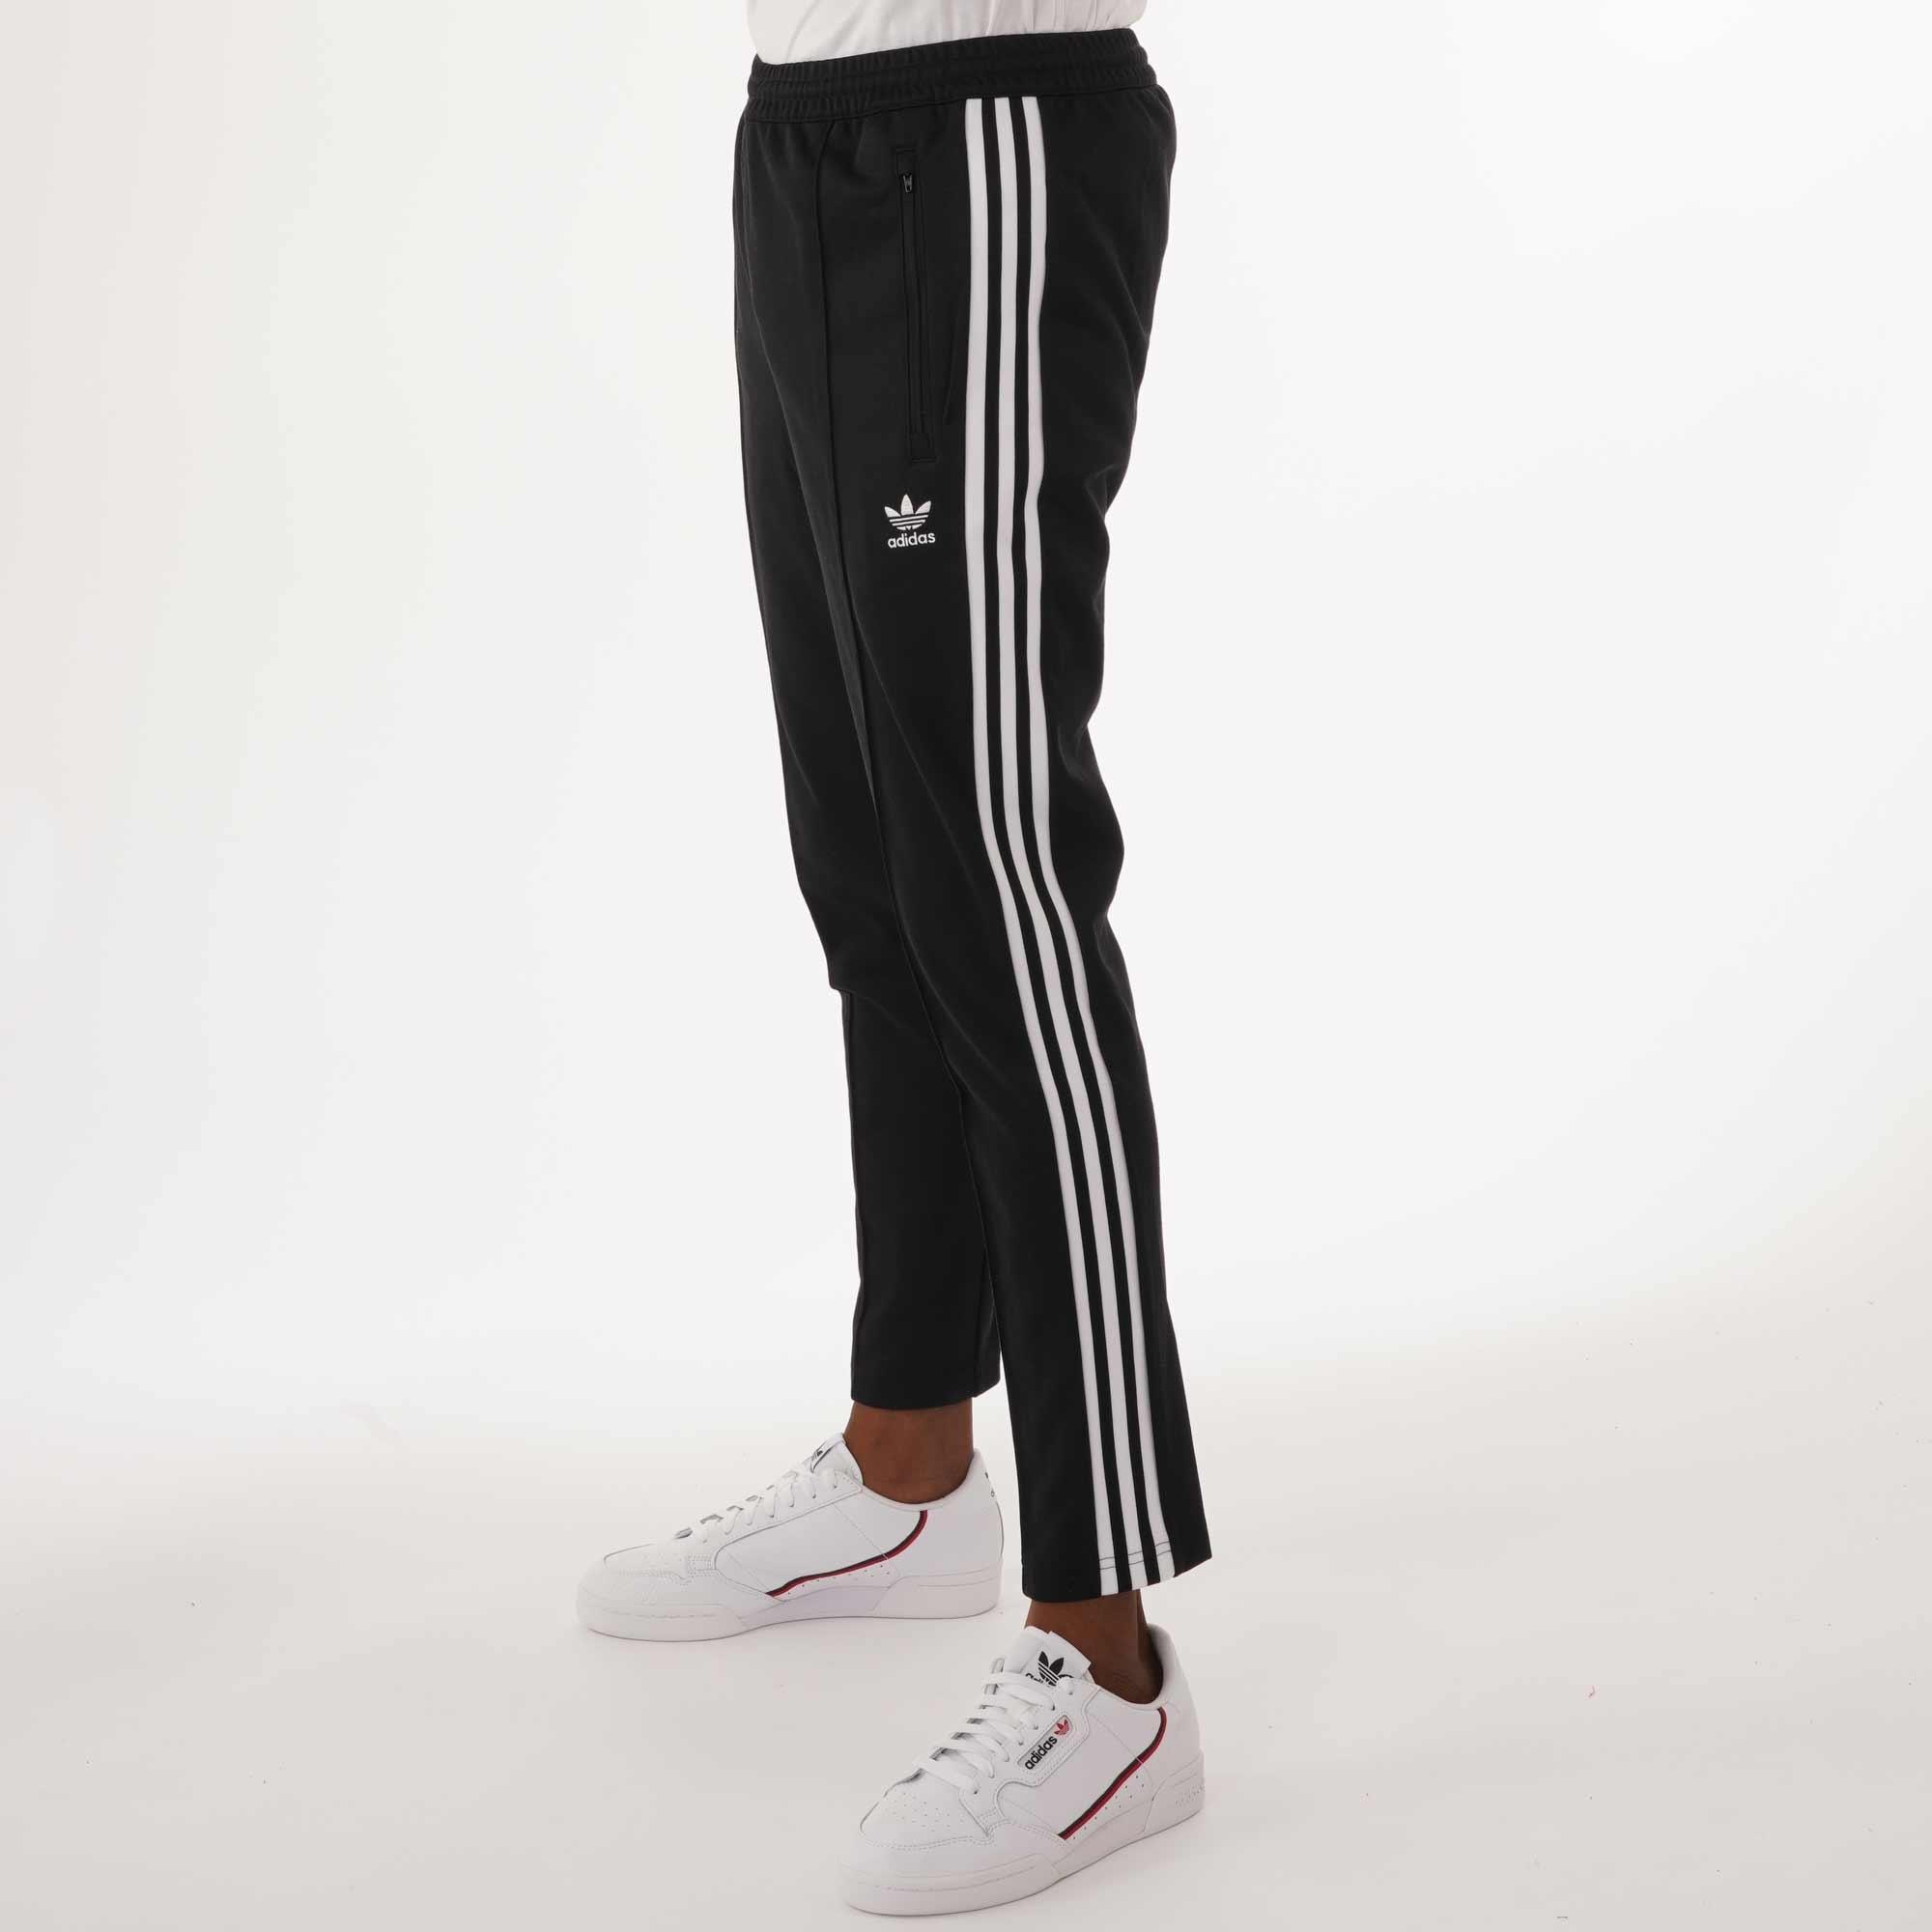 adidas franz beckenbauer track pant, super sell UP TO 77% OFF -  statehouse.gov.sl